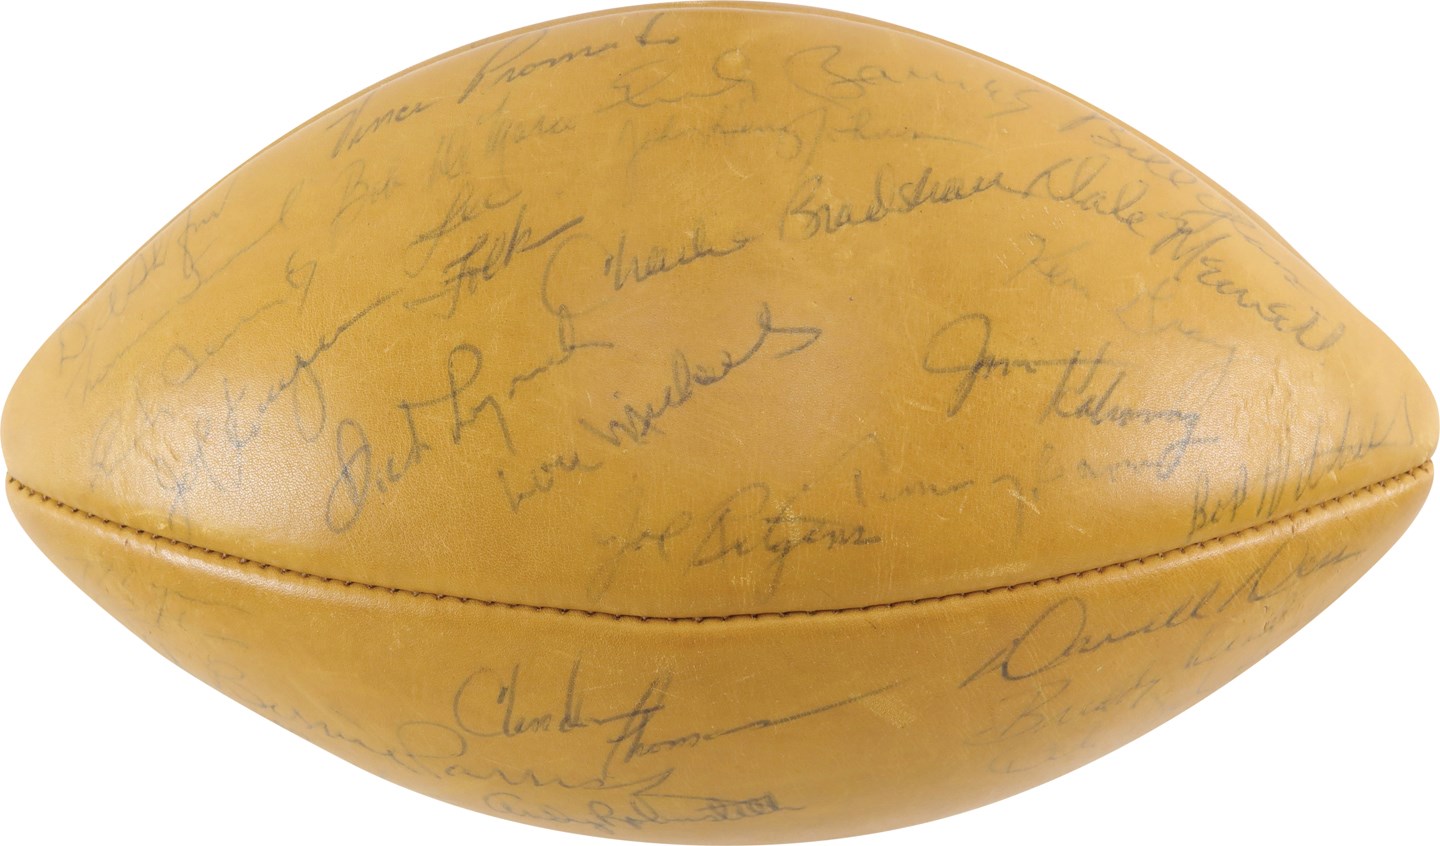 1963 Pro Bowl Team-Signed Football with Jim Brown (JSA)